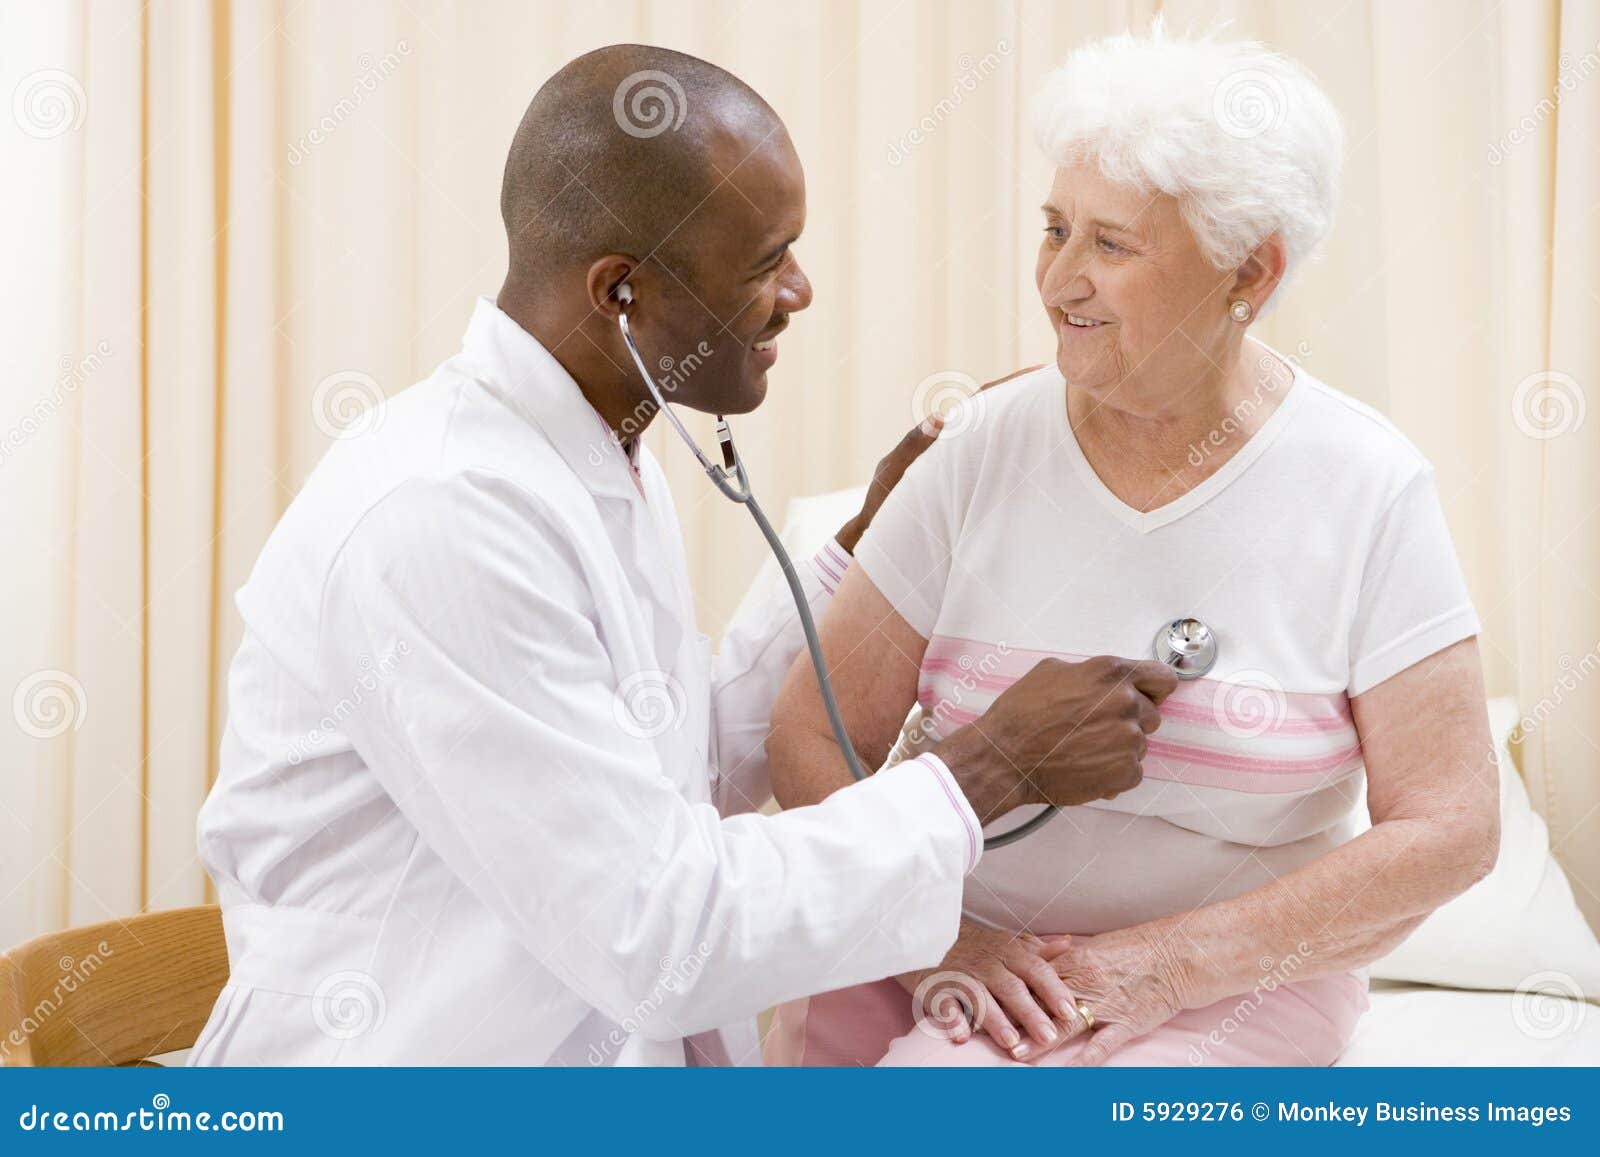 doctor giving checkup with stethoscope to woman